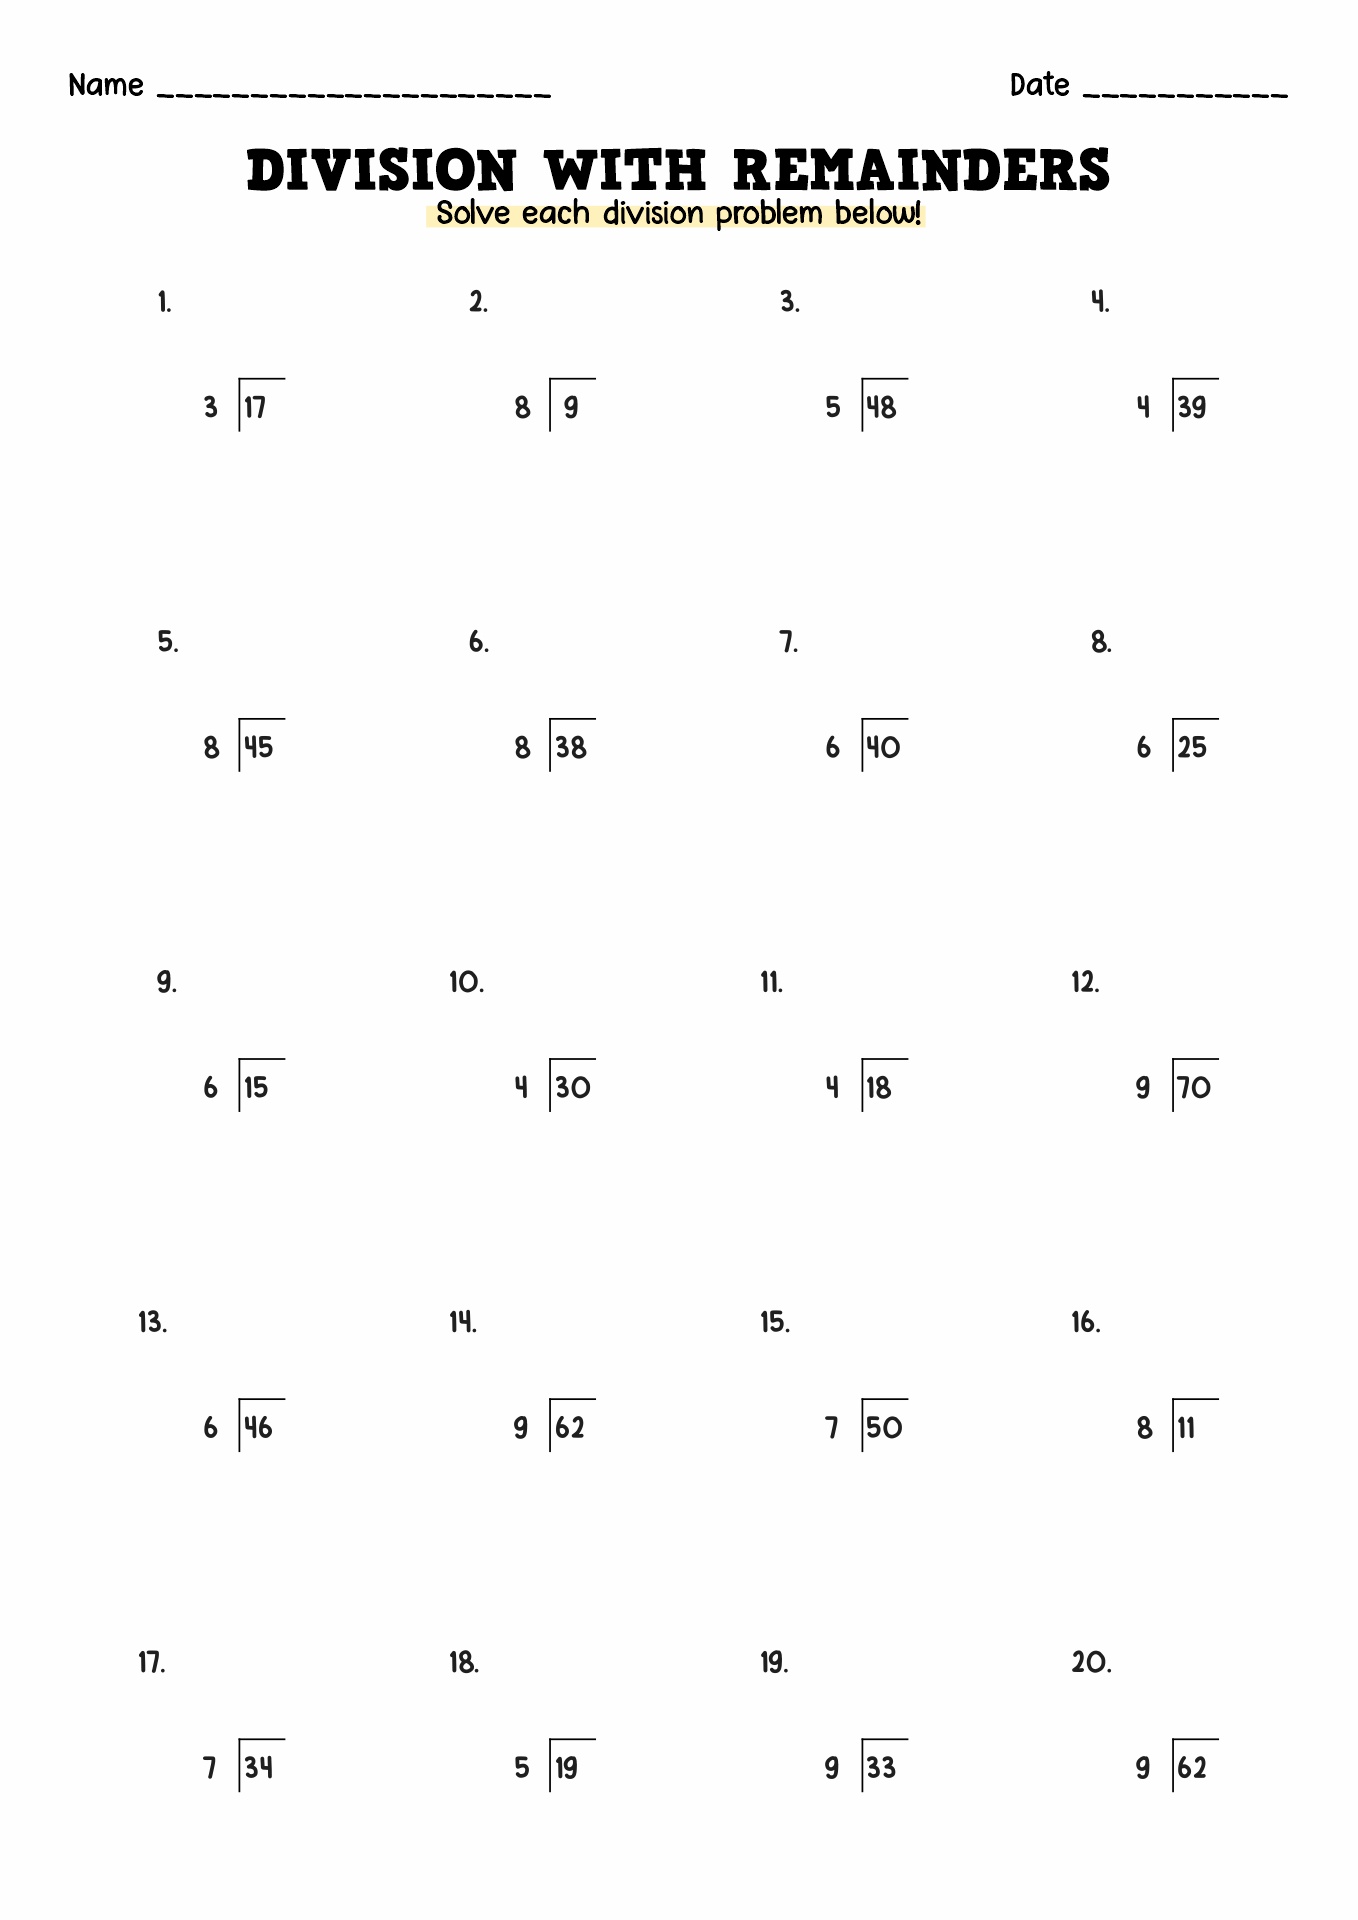 Free Division with Remainders Worksheets Image